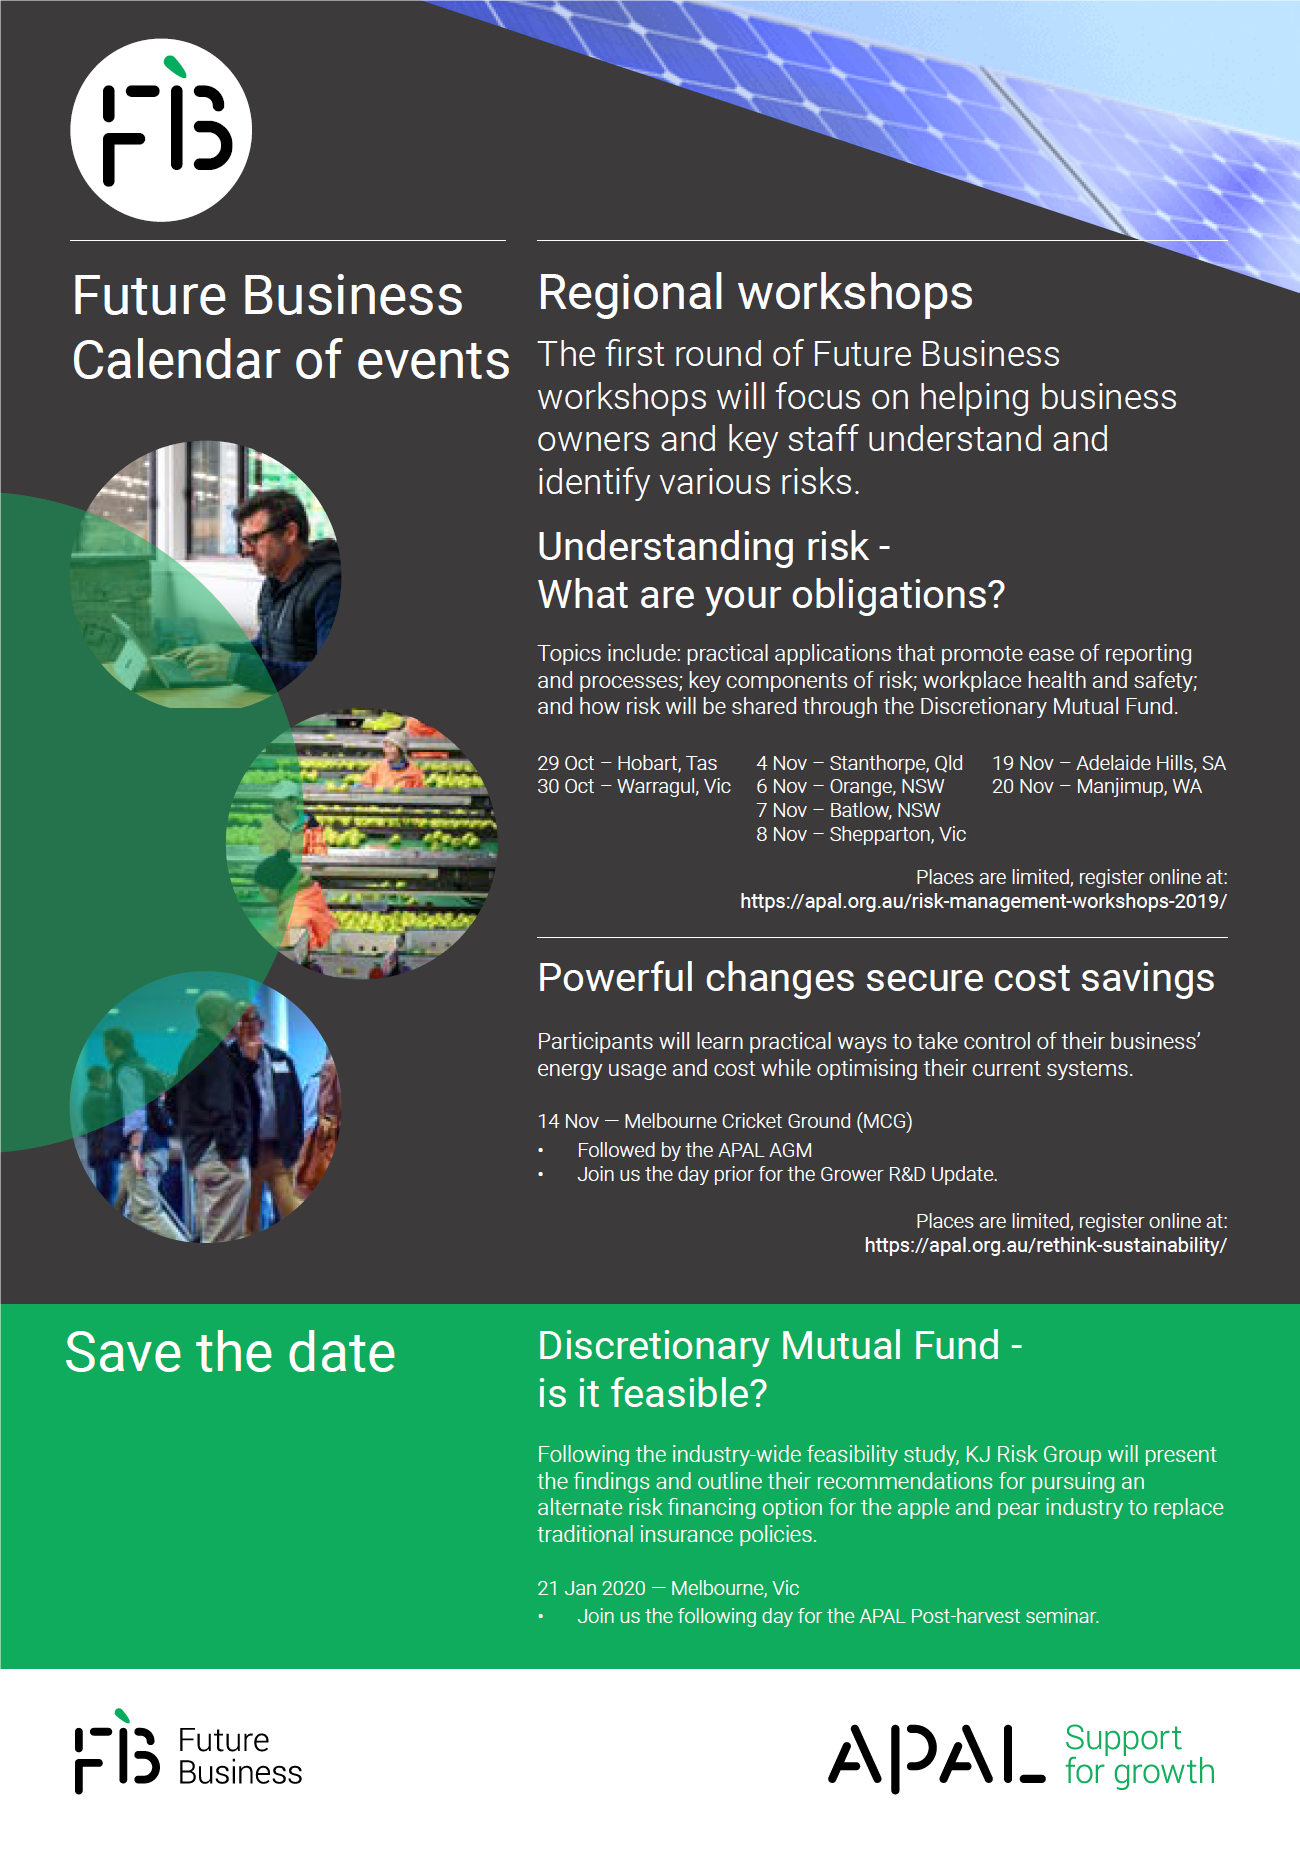 Future Business- Calendar of Events: Risk Management workshops (Sth Vic 30th Oct, Goulburn Valley 8th Nov) /Powerful changes secure cost savings workshop